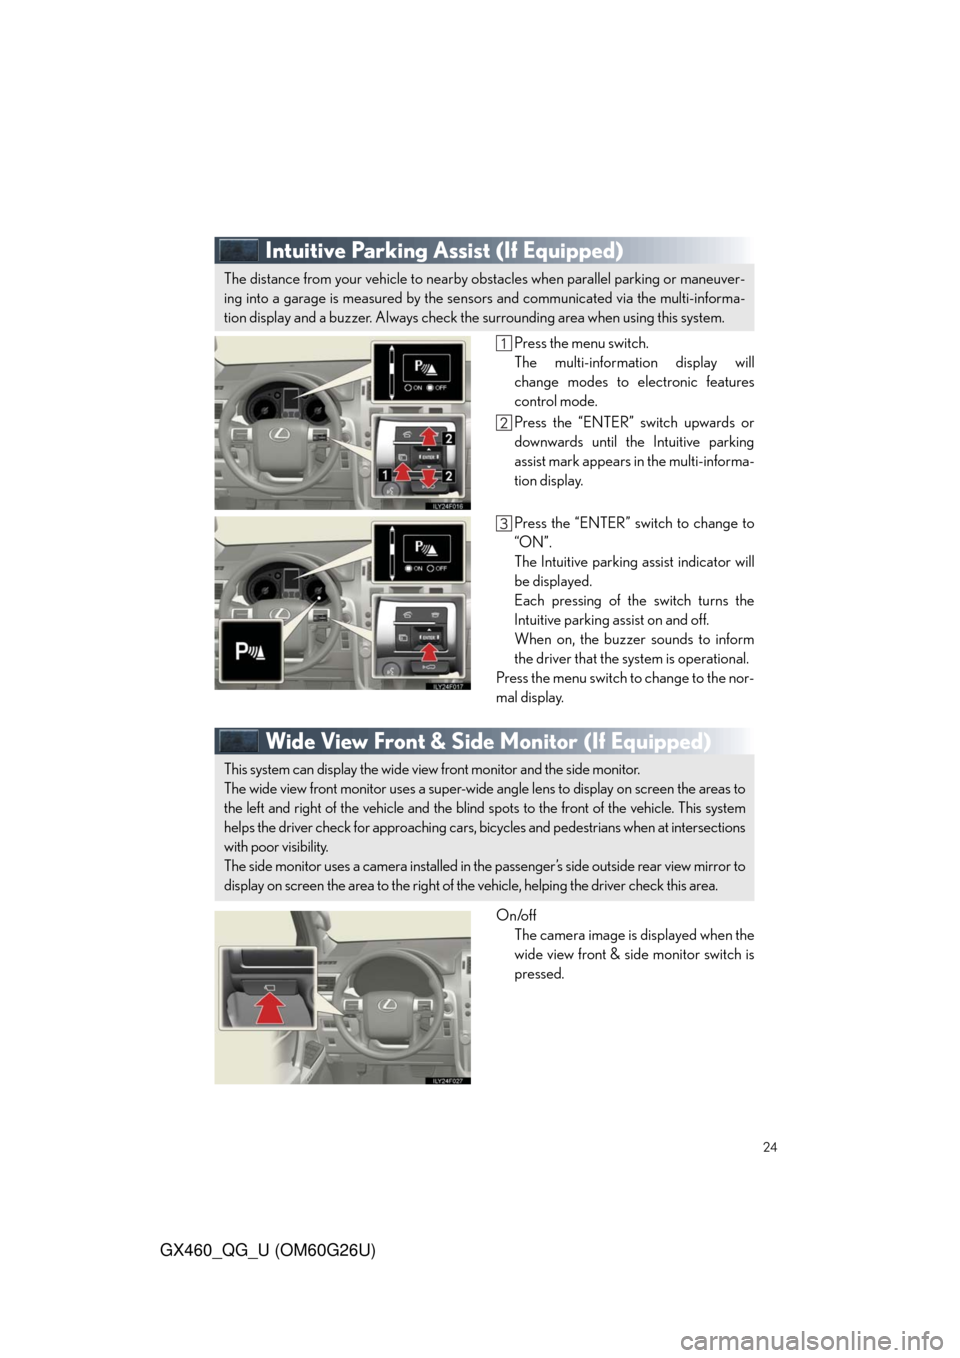 Lexus GX460 2011  Do-It-Yourself Maintenance / LEXUS 2011 GX460 OWNERS MANUAL QUICK GUIDE (OM60G26U) 24
GX460_QG_U (OM60G26U)
Intuitive Parking Assist (If Equipped)
Press the menu switch.
The multi-information display will
change modes to electronic features
control mode.
Press the “ENTER” switch